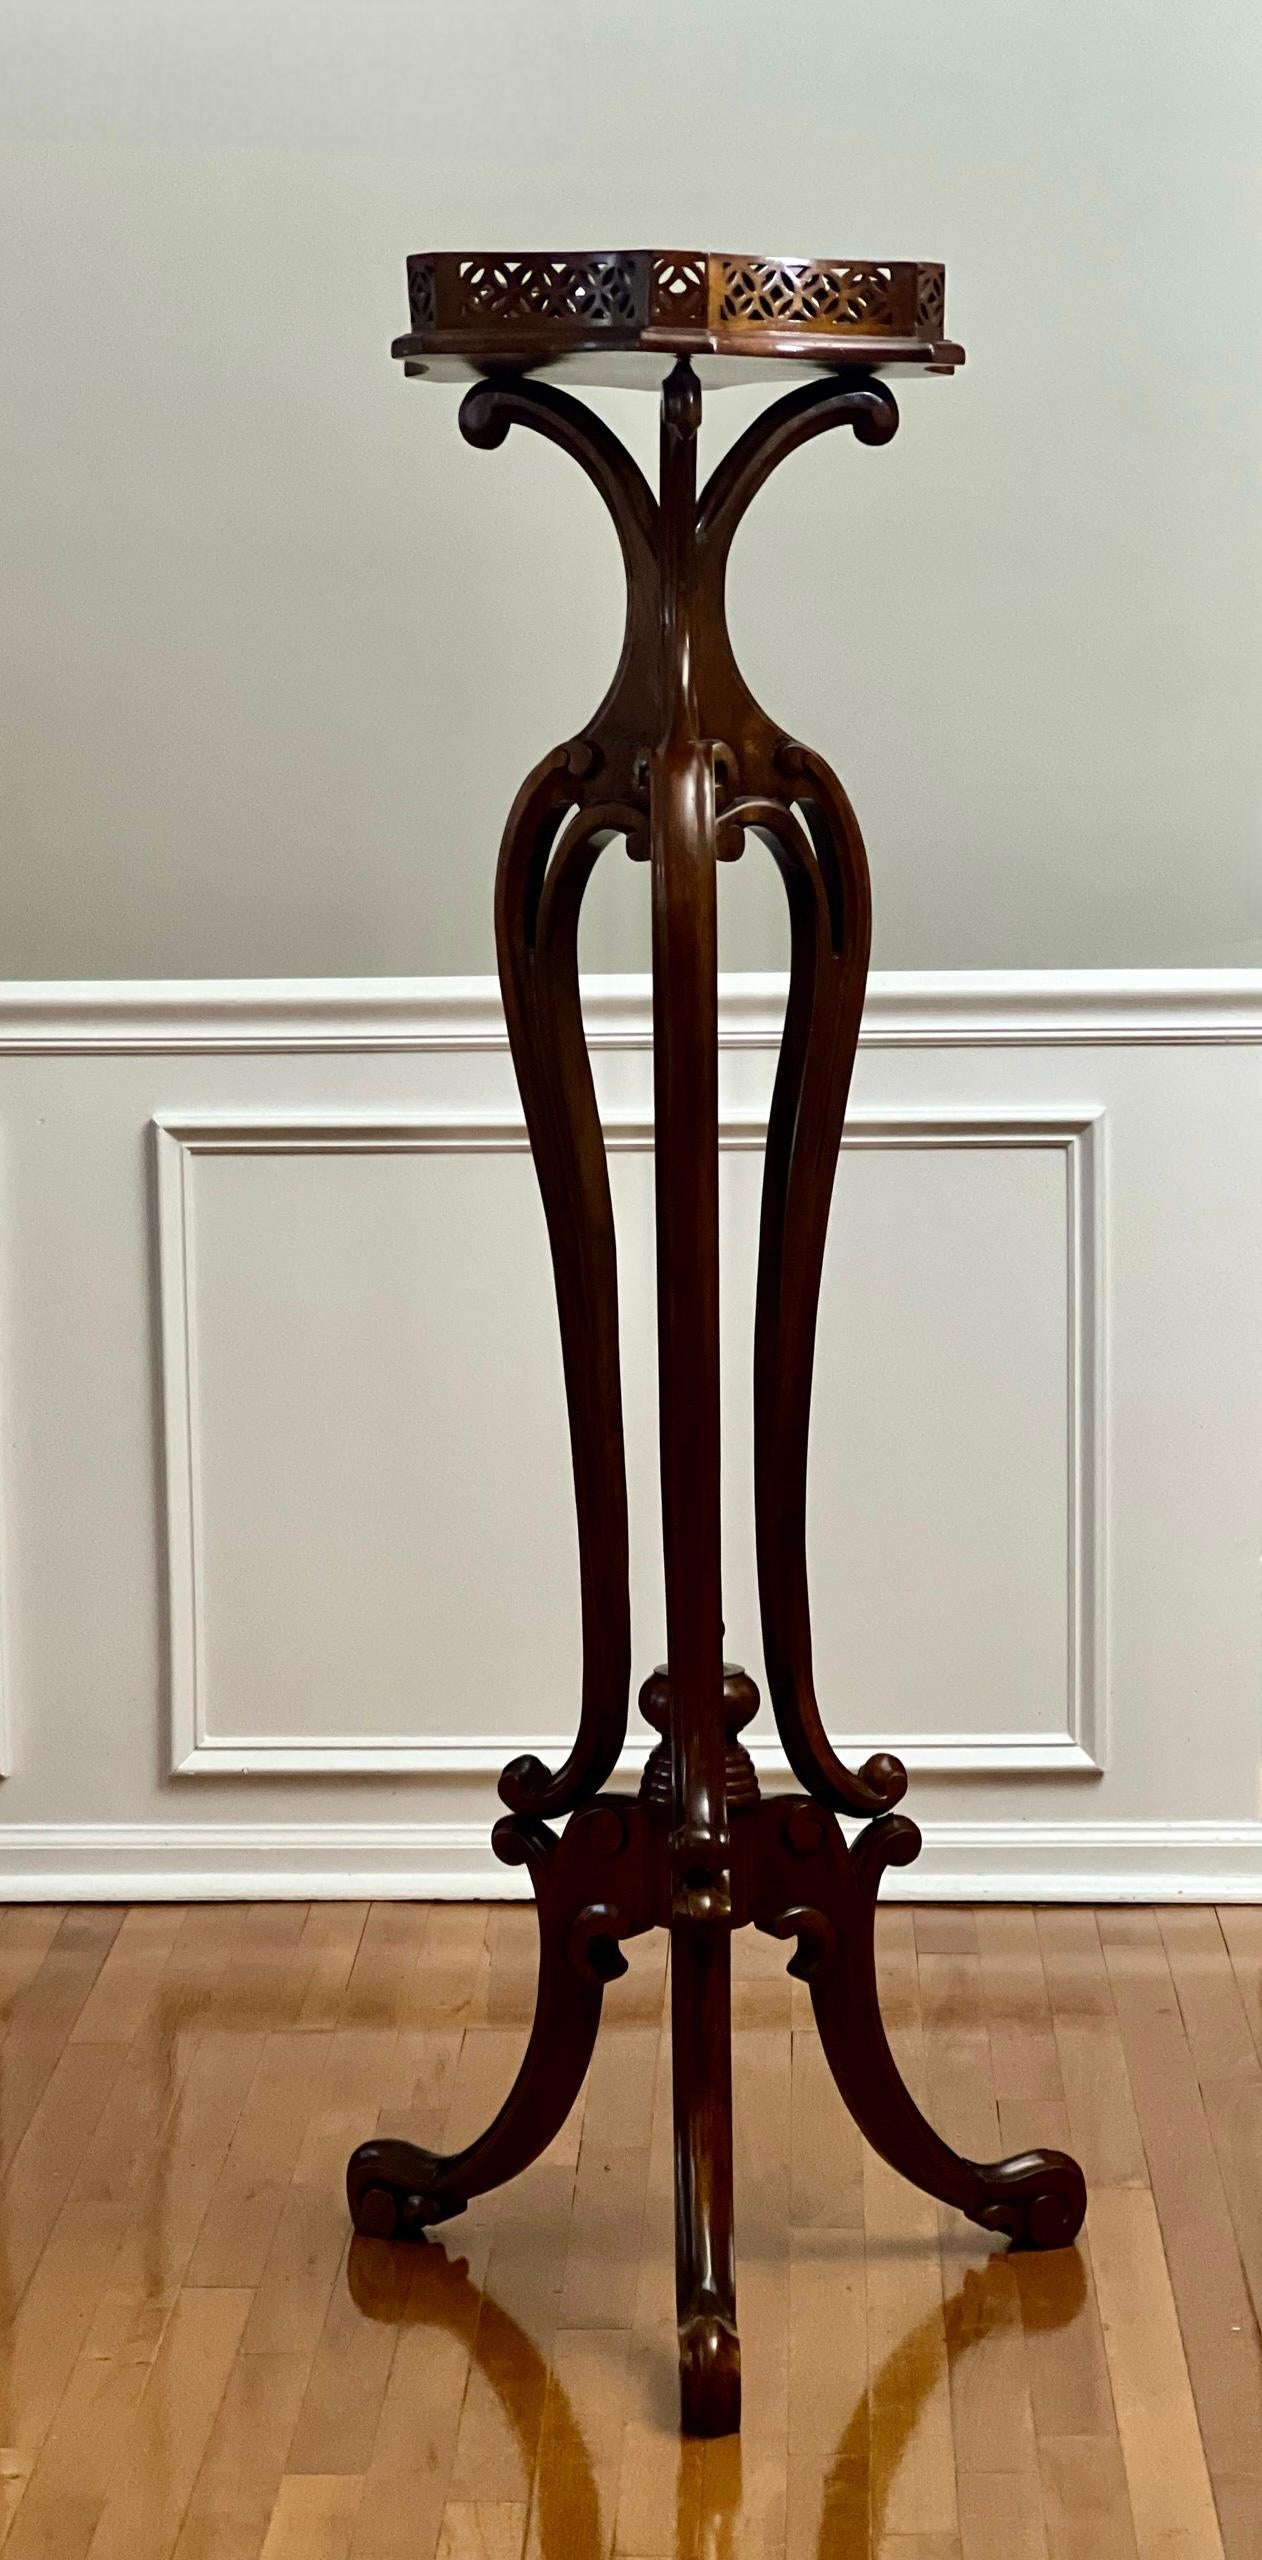 Chinese Chippendale style tall rosewood pedestal stand, 20th century.

Magnificent large carved pedestal with fretwork gallery on a shaped top and three scrolled legs with openwork. Sculpted legs have a tiered appearance as they meet the base with a